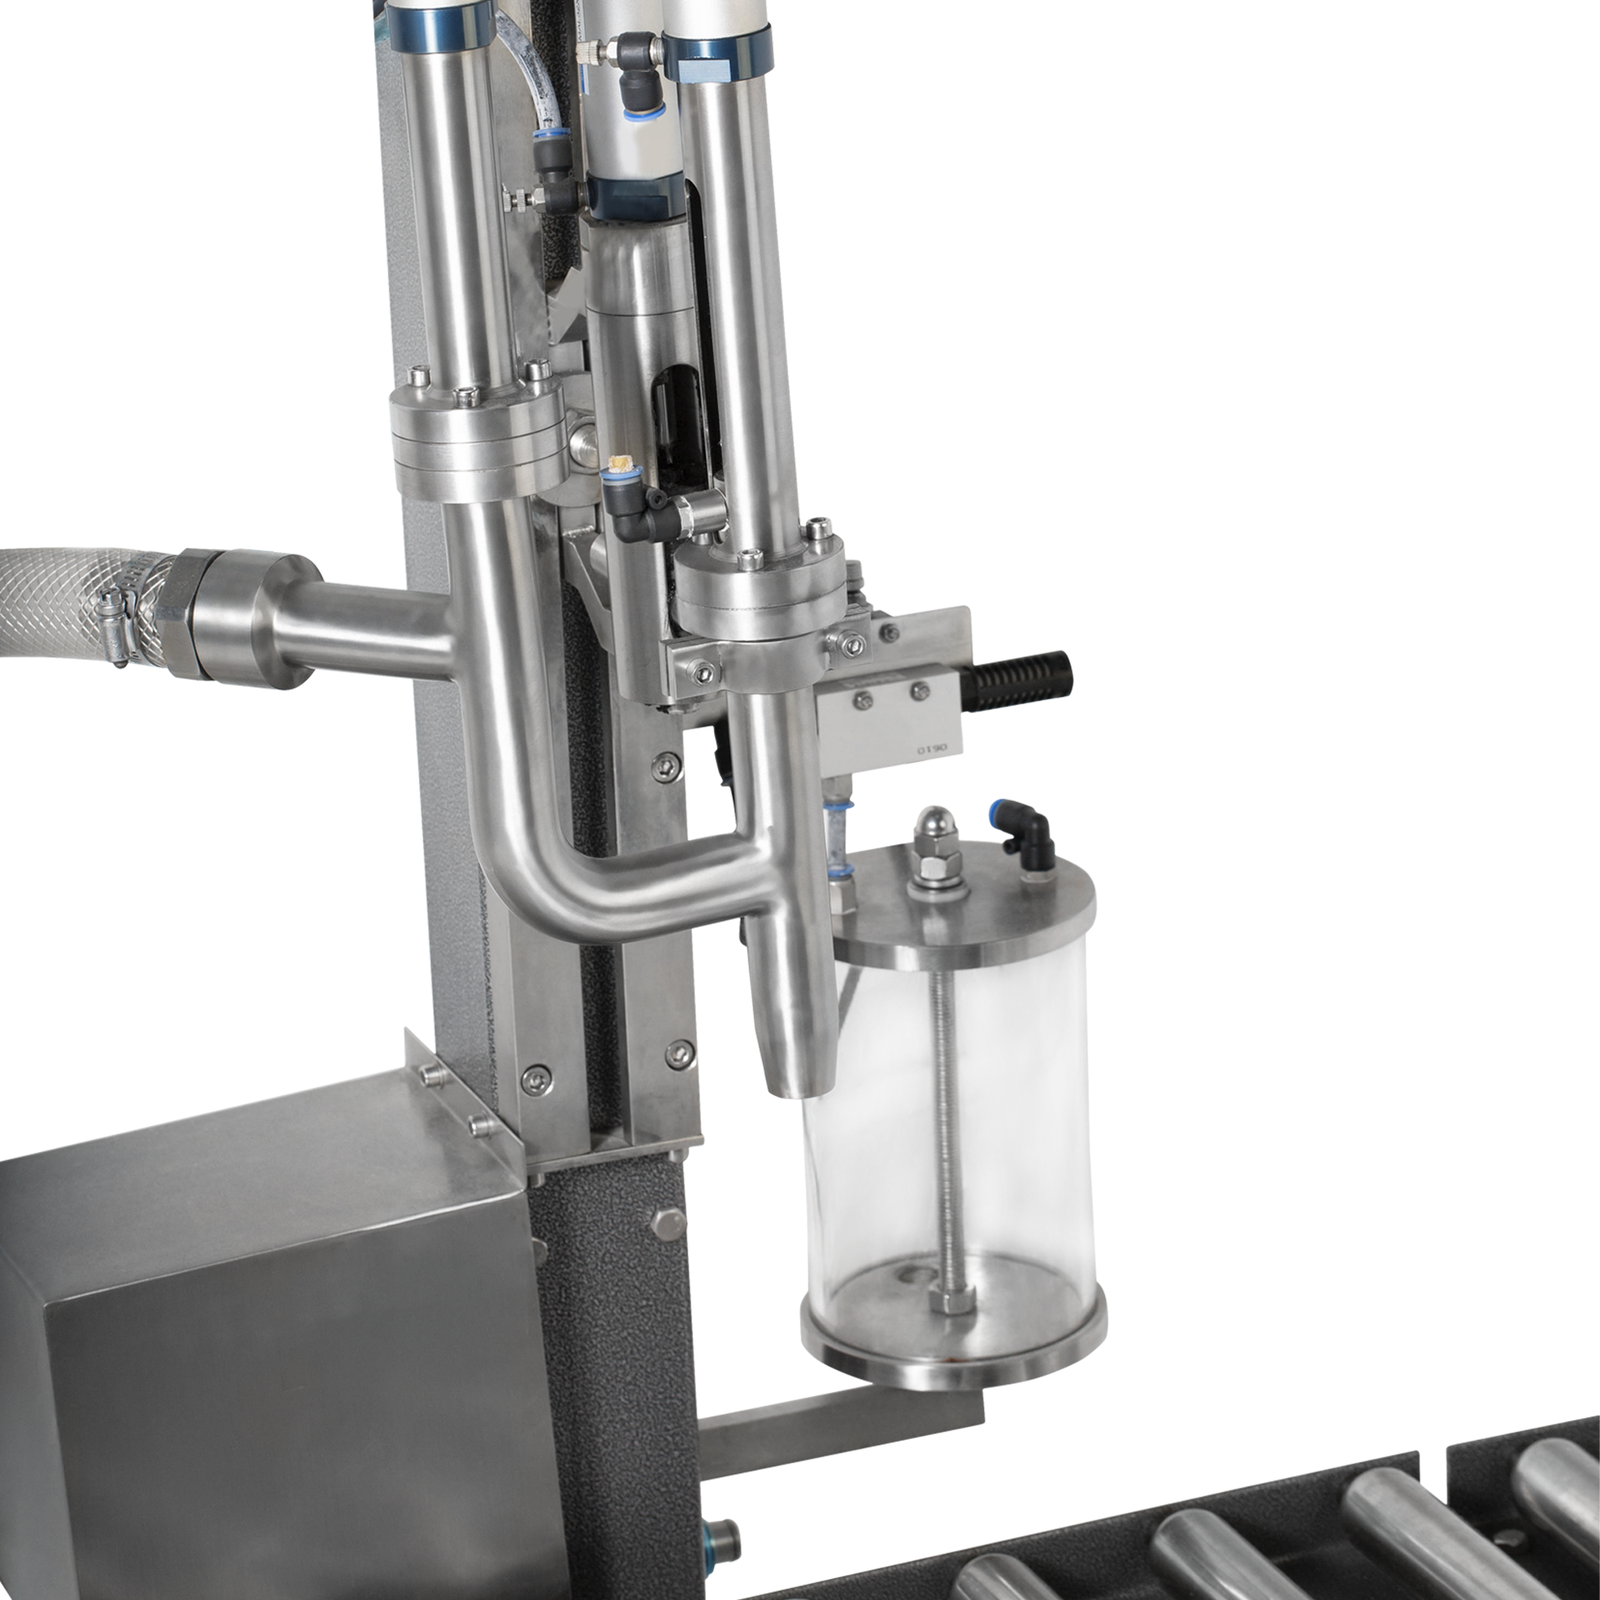 Closeup shows attachment of the suction hose and the dispensing nozzle of the jorestech liquid net weight filler.